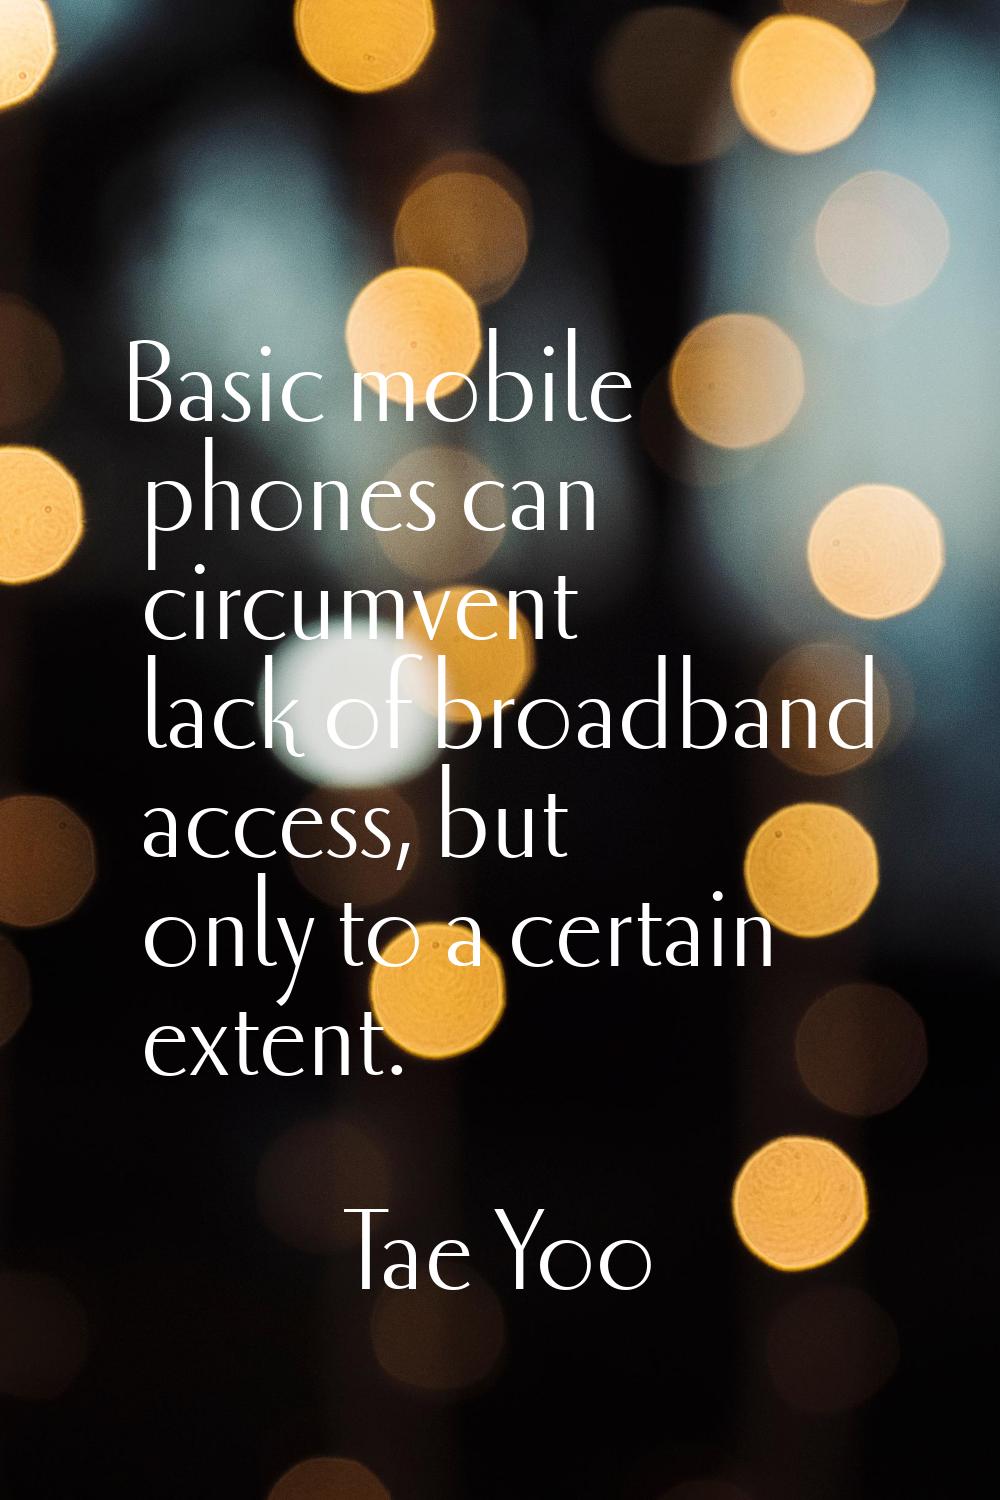 Basic mobile phones can circumvent lack of broadband access, but only to a certain extent.